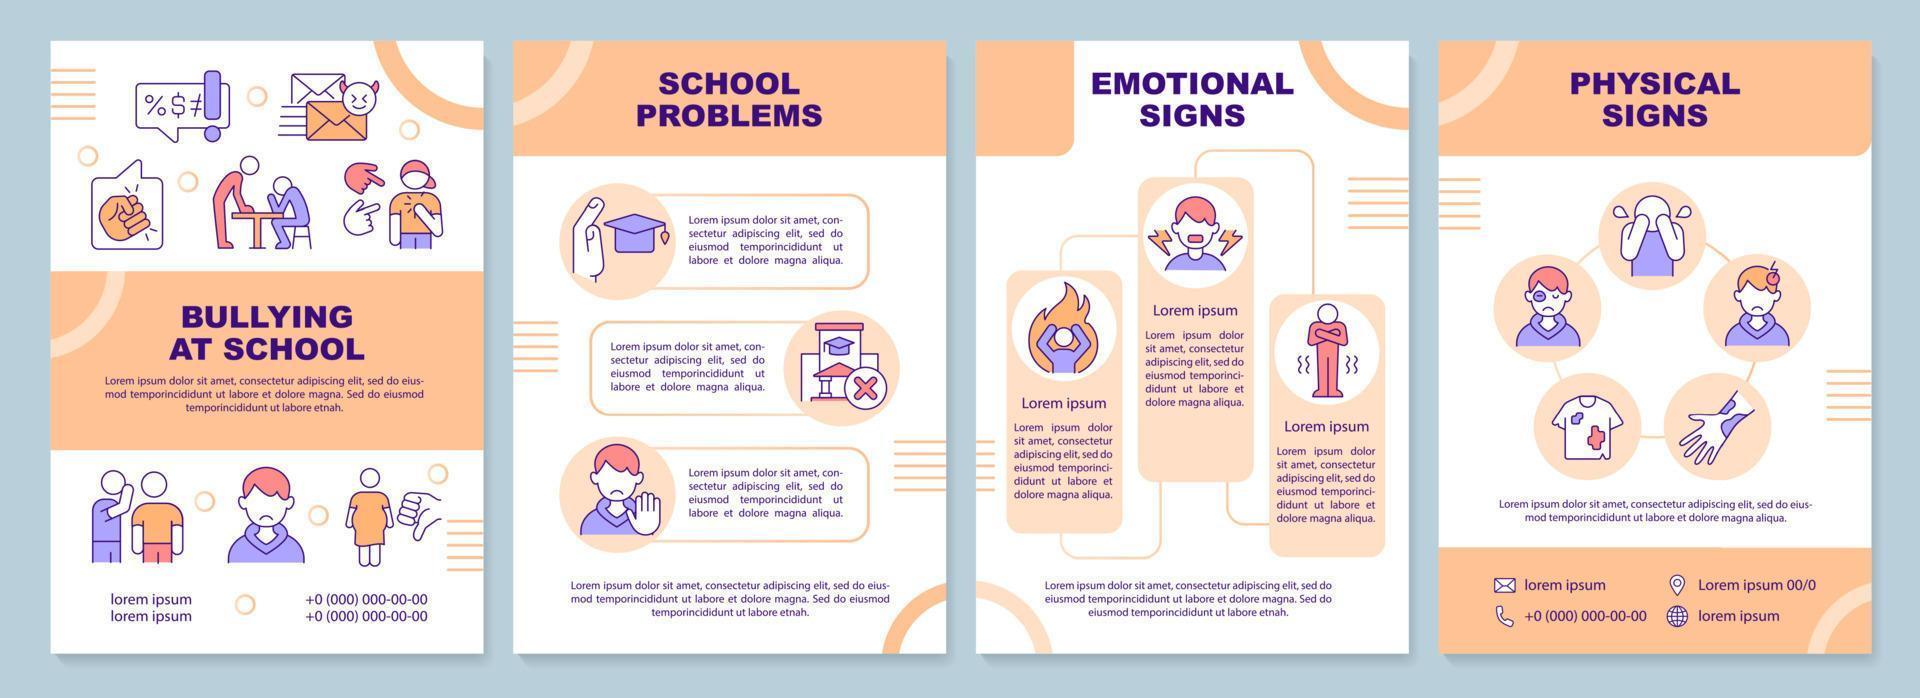 Bullying at school orange brochure template. Emotional signs. Leaflet design with linear icons. Editable 4 vector layouts for presentation, annual reports.